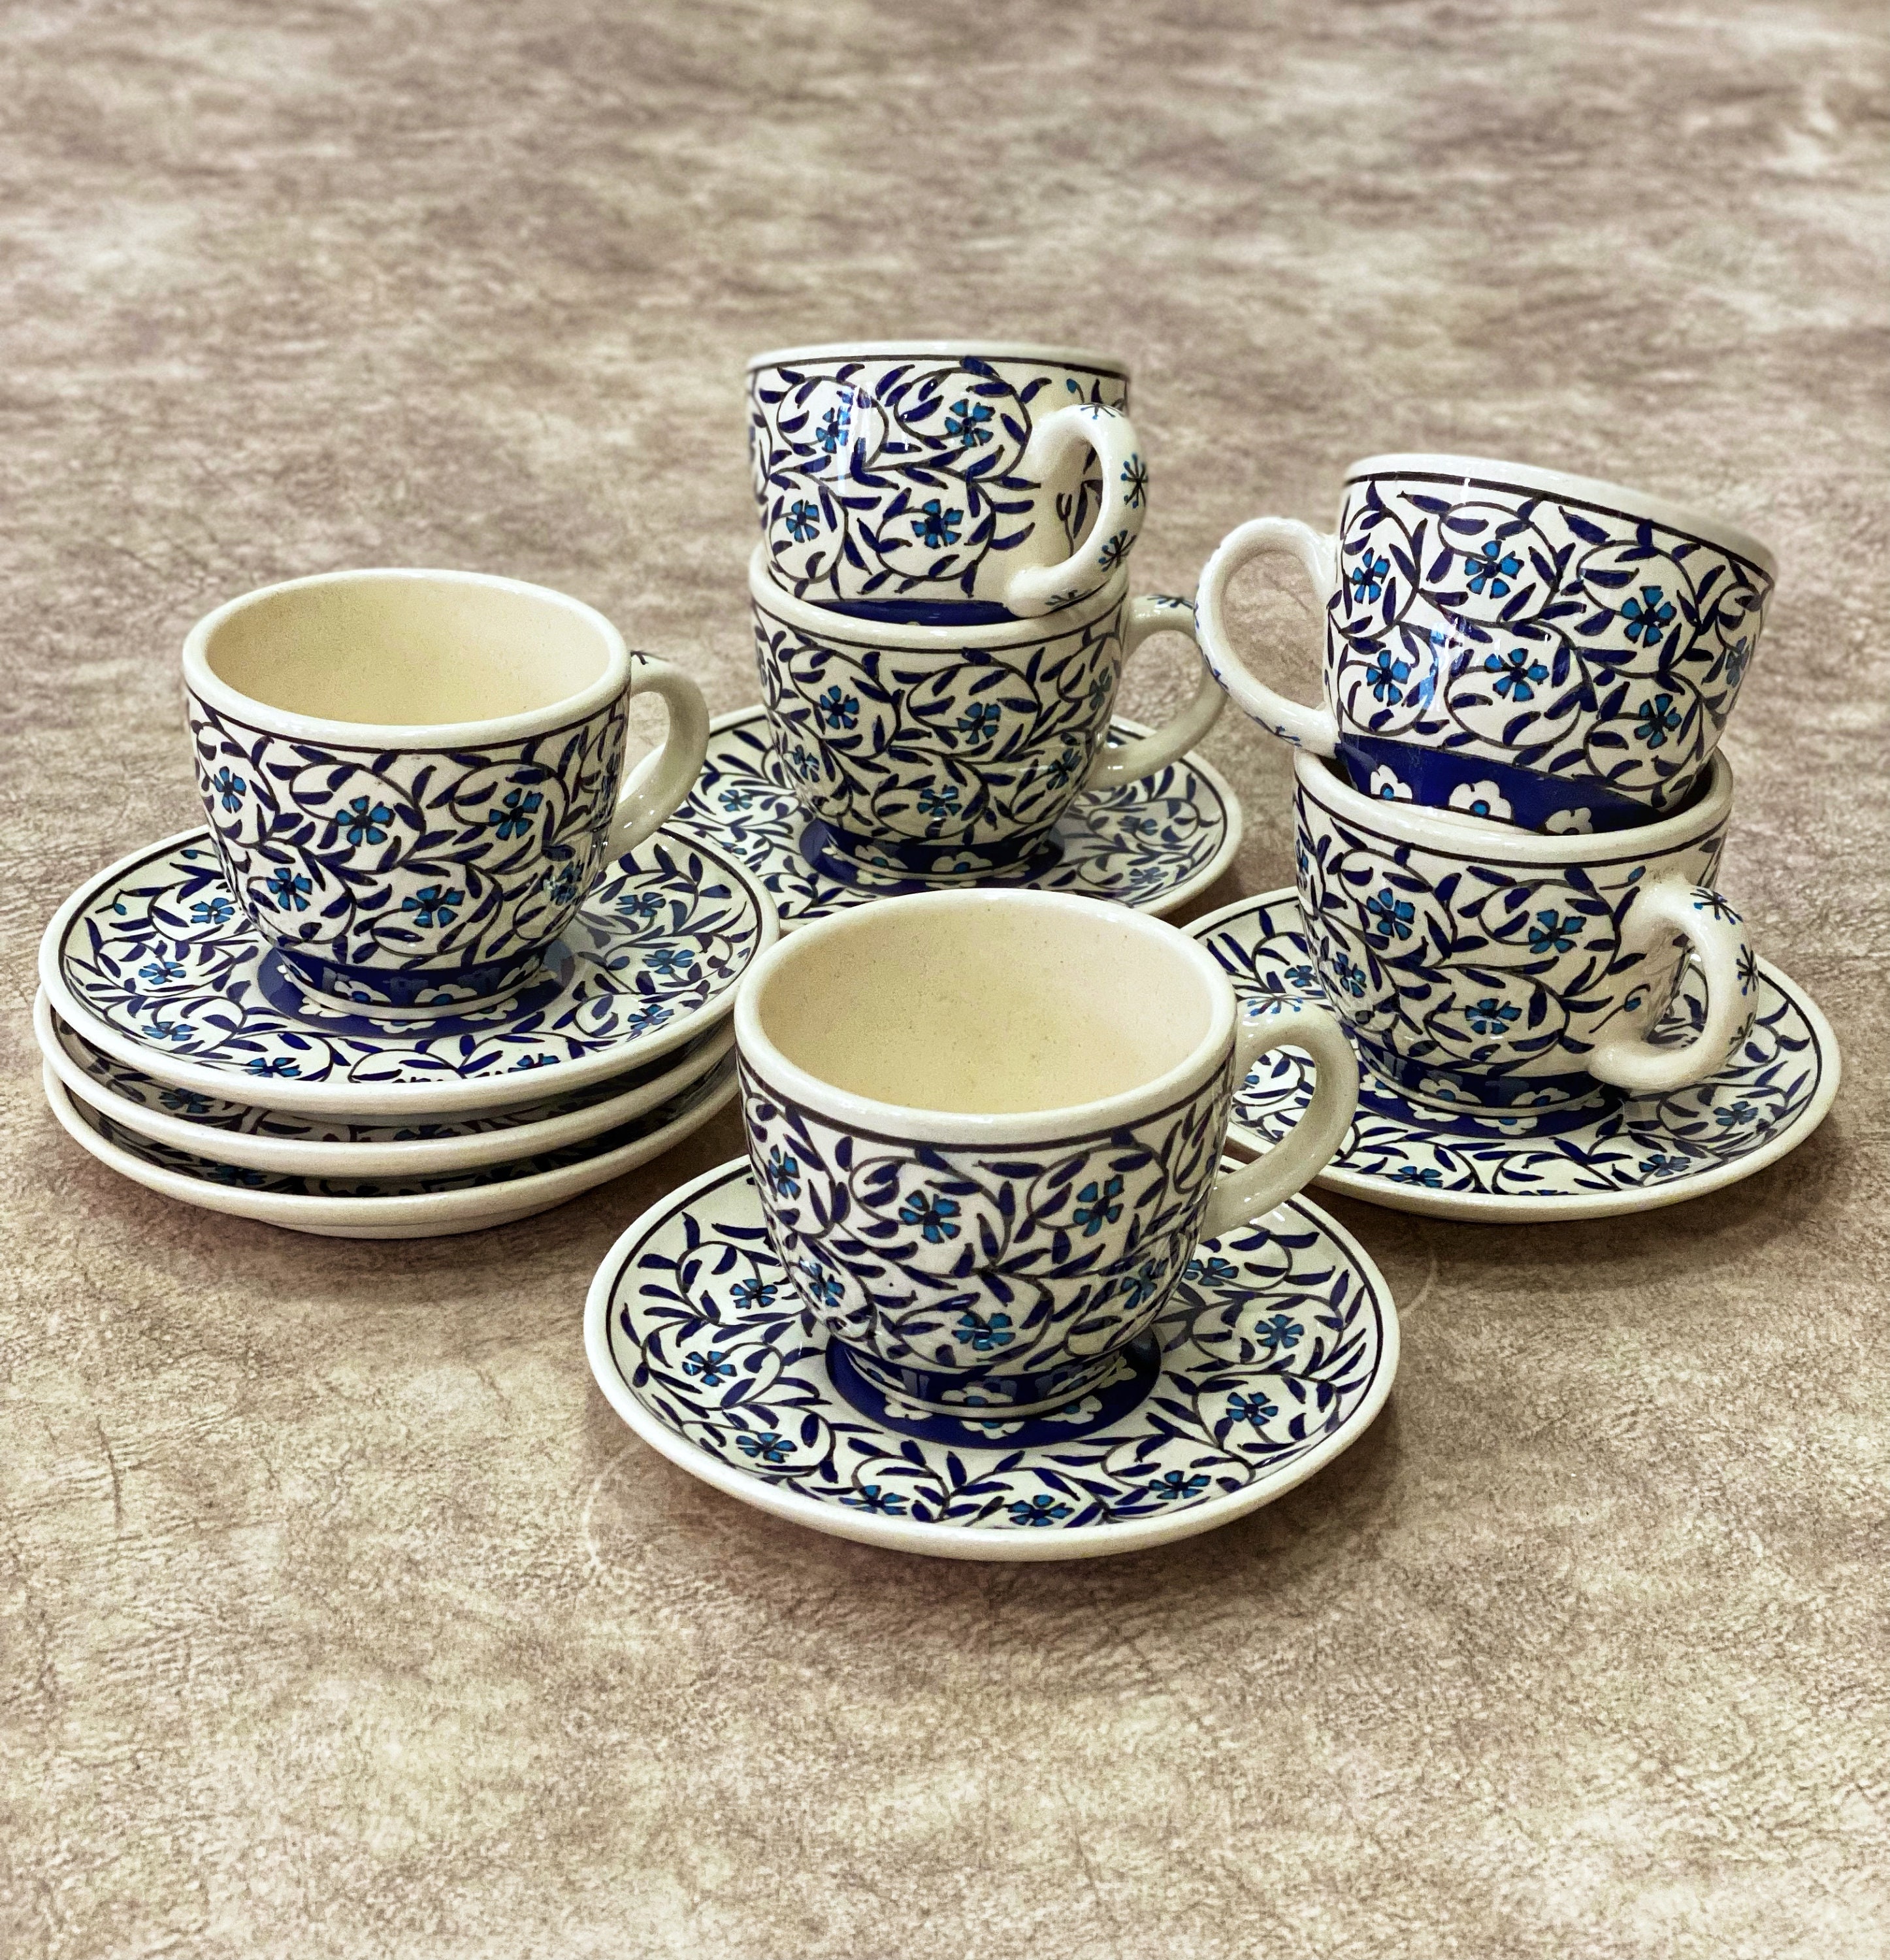 Ribbon, Small Espresso Cups and Saucers, Set of 6 Demitasse Cups, Turkish  Coffee Cups, Espresso Set,…See more Ribbon, Small Espresso Cups and  Saucers